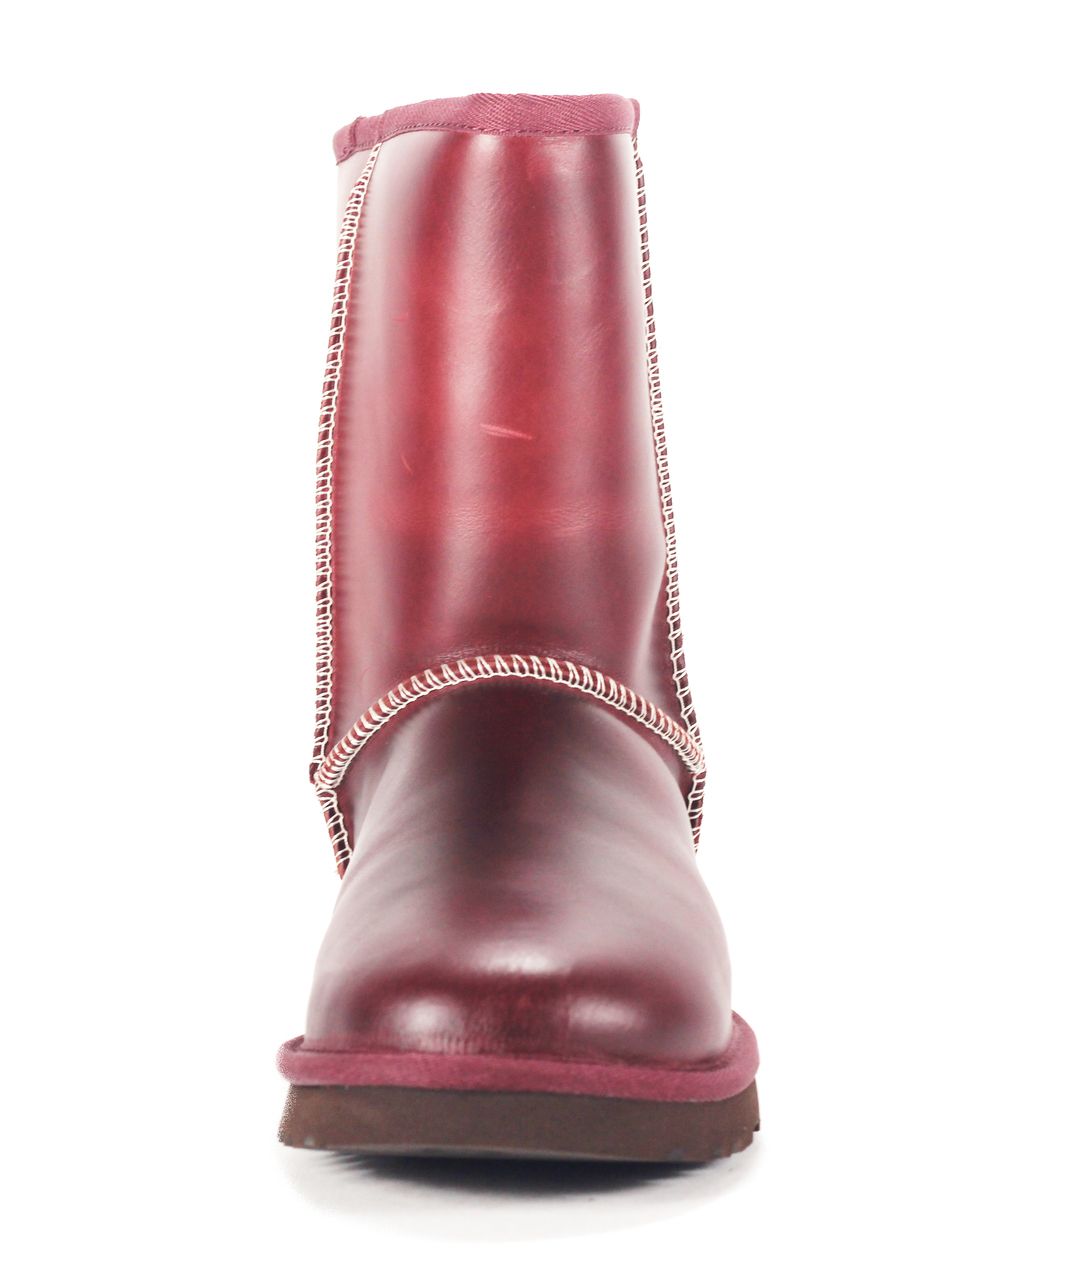 UGG Australia for Women: Classic Short Leather Oxblood Boot Red